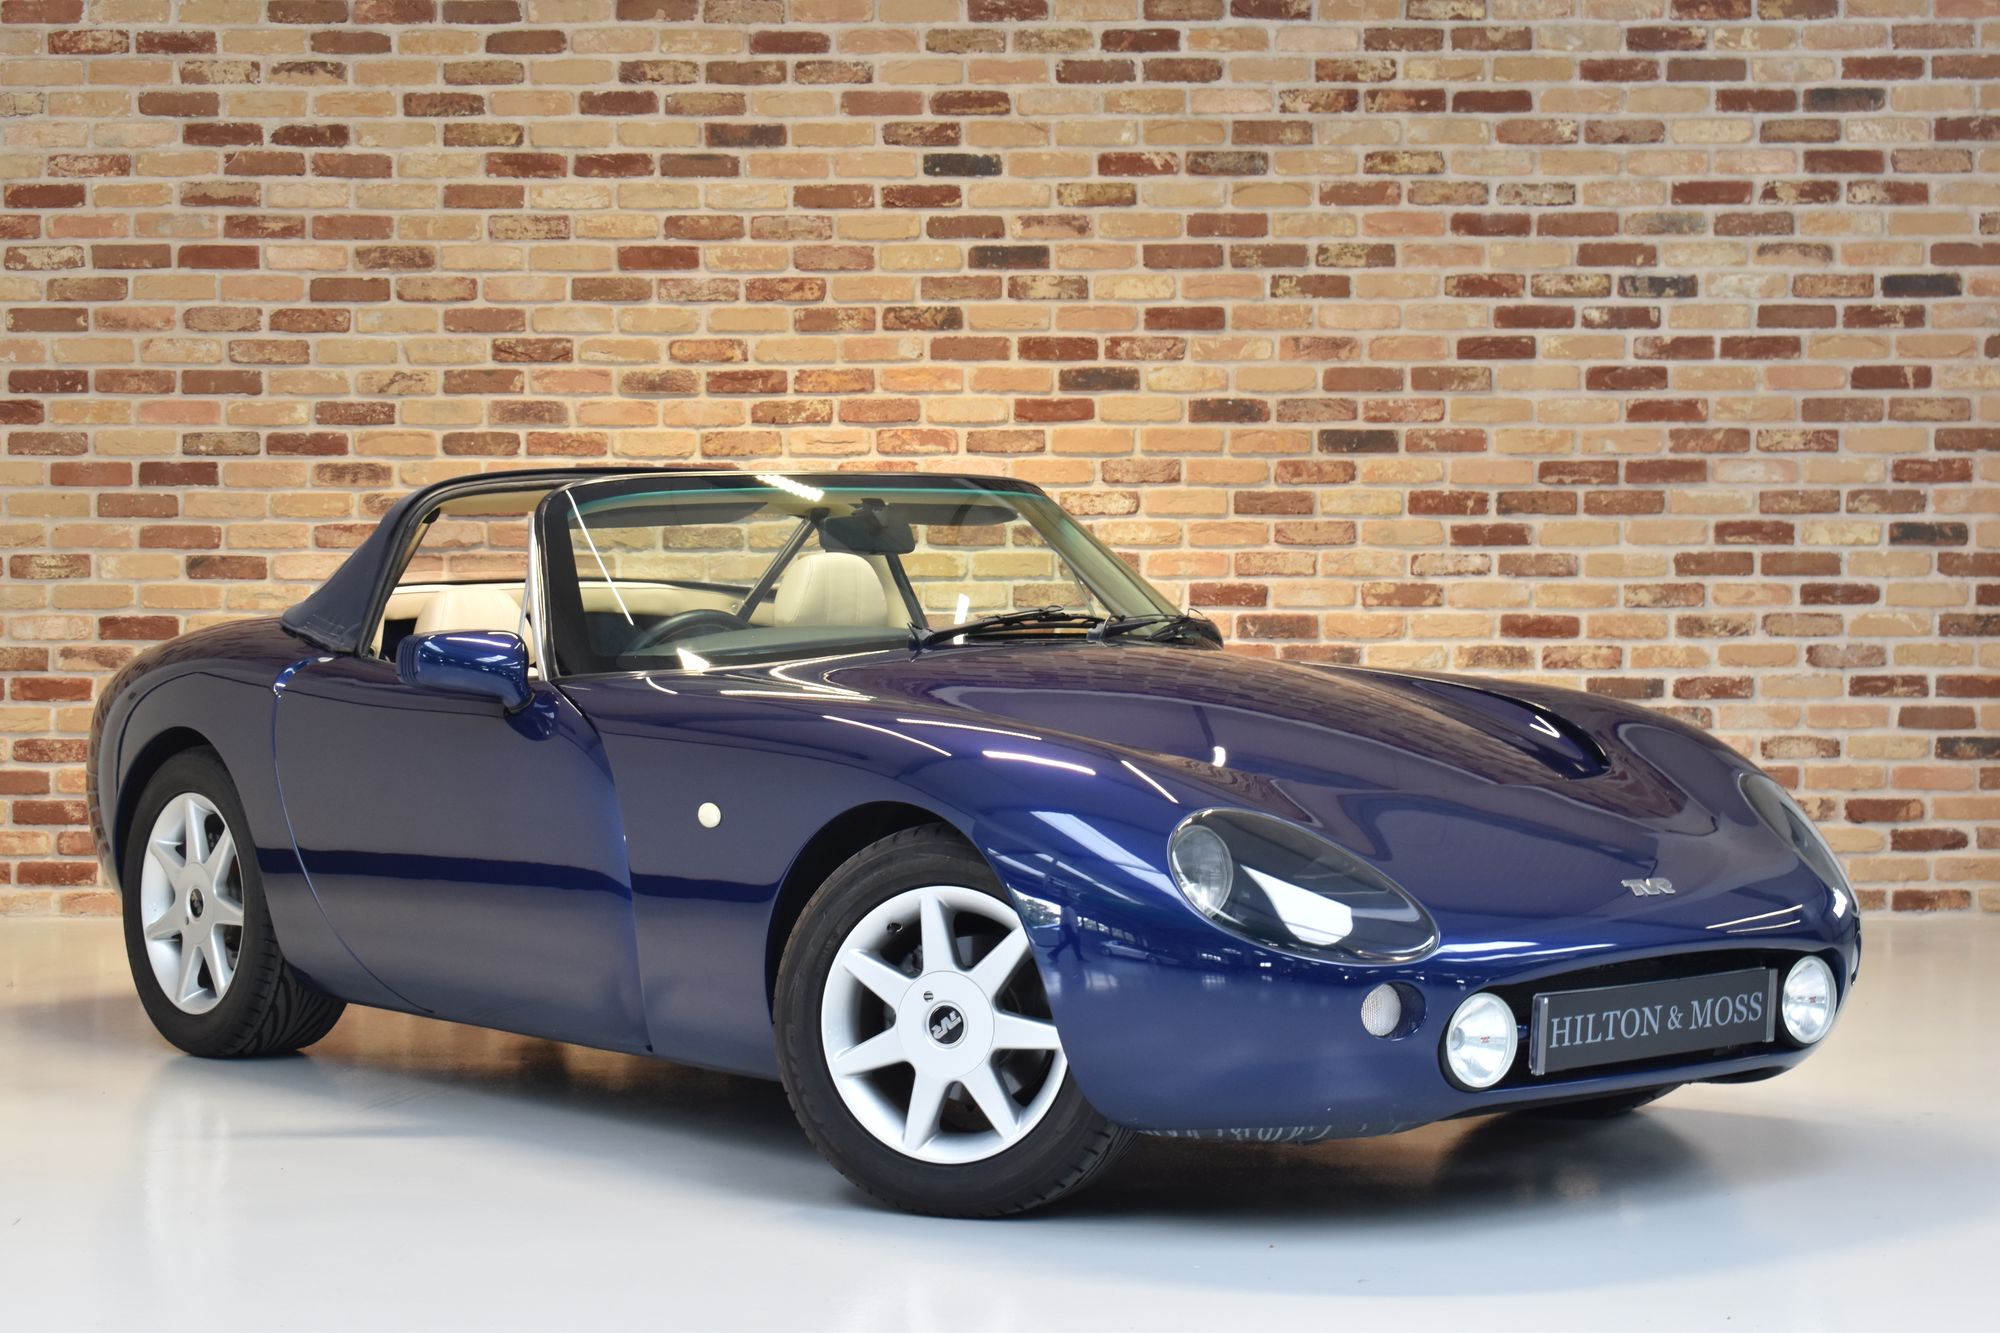 1999 TVR Griffith 500